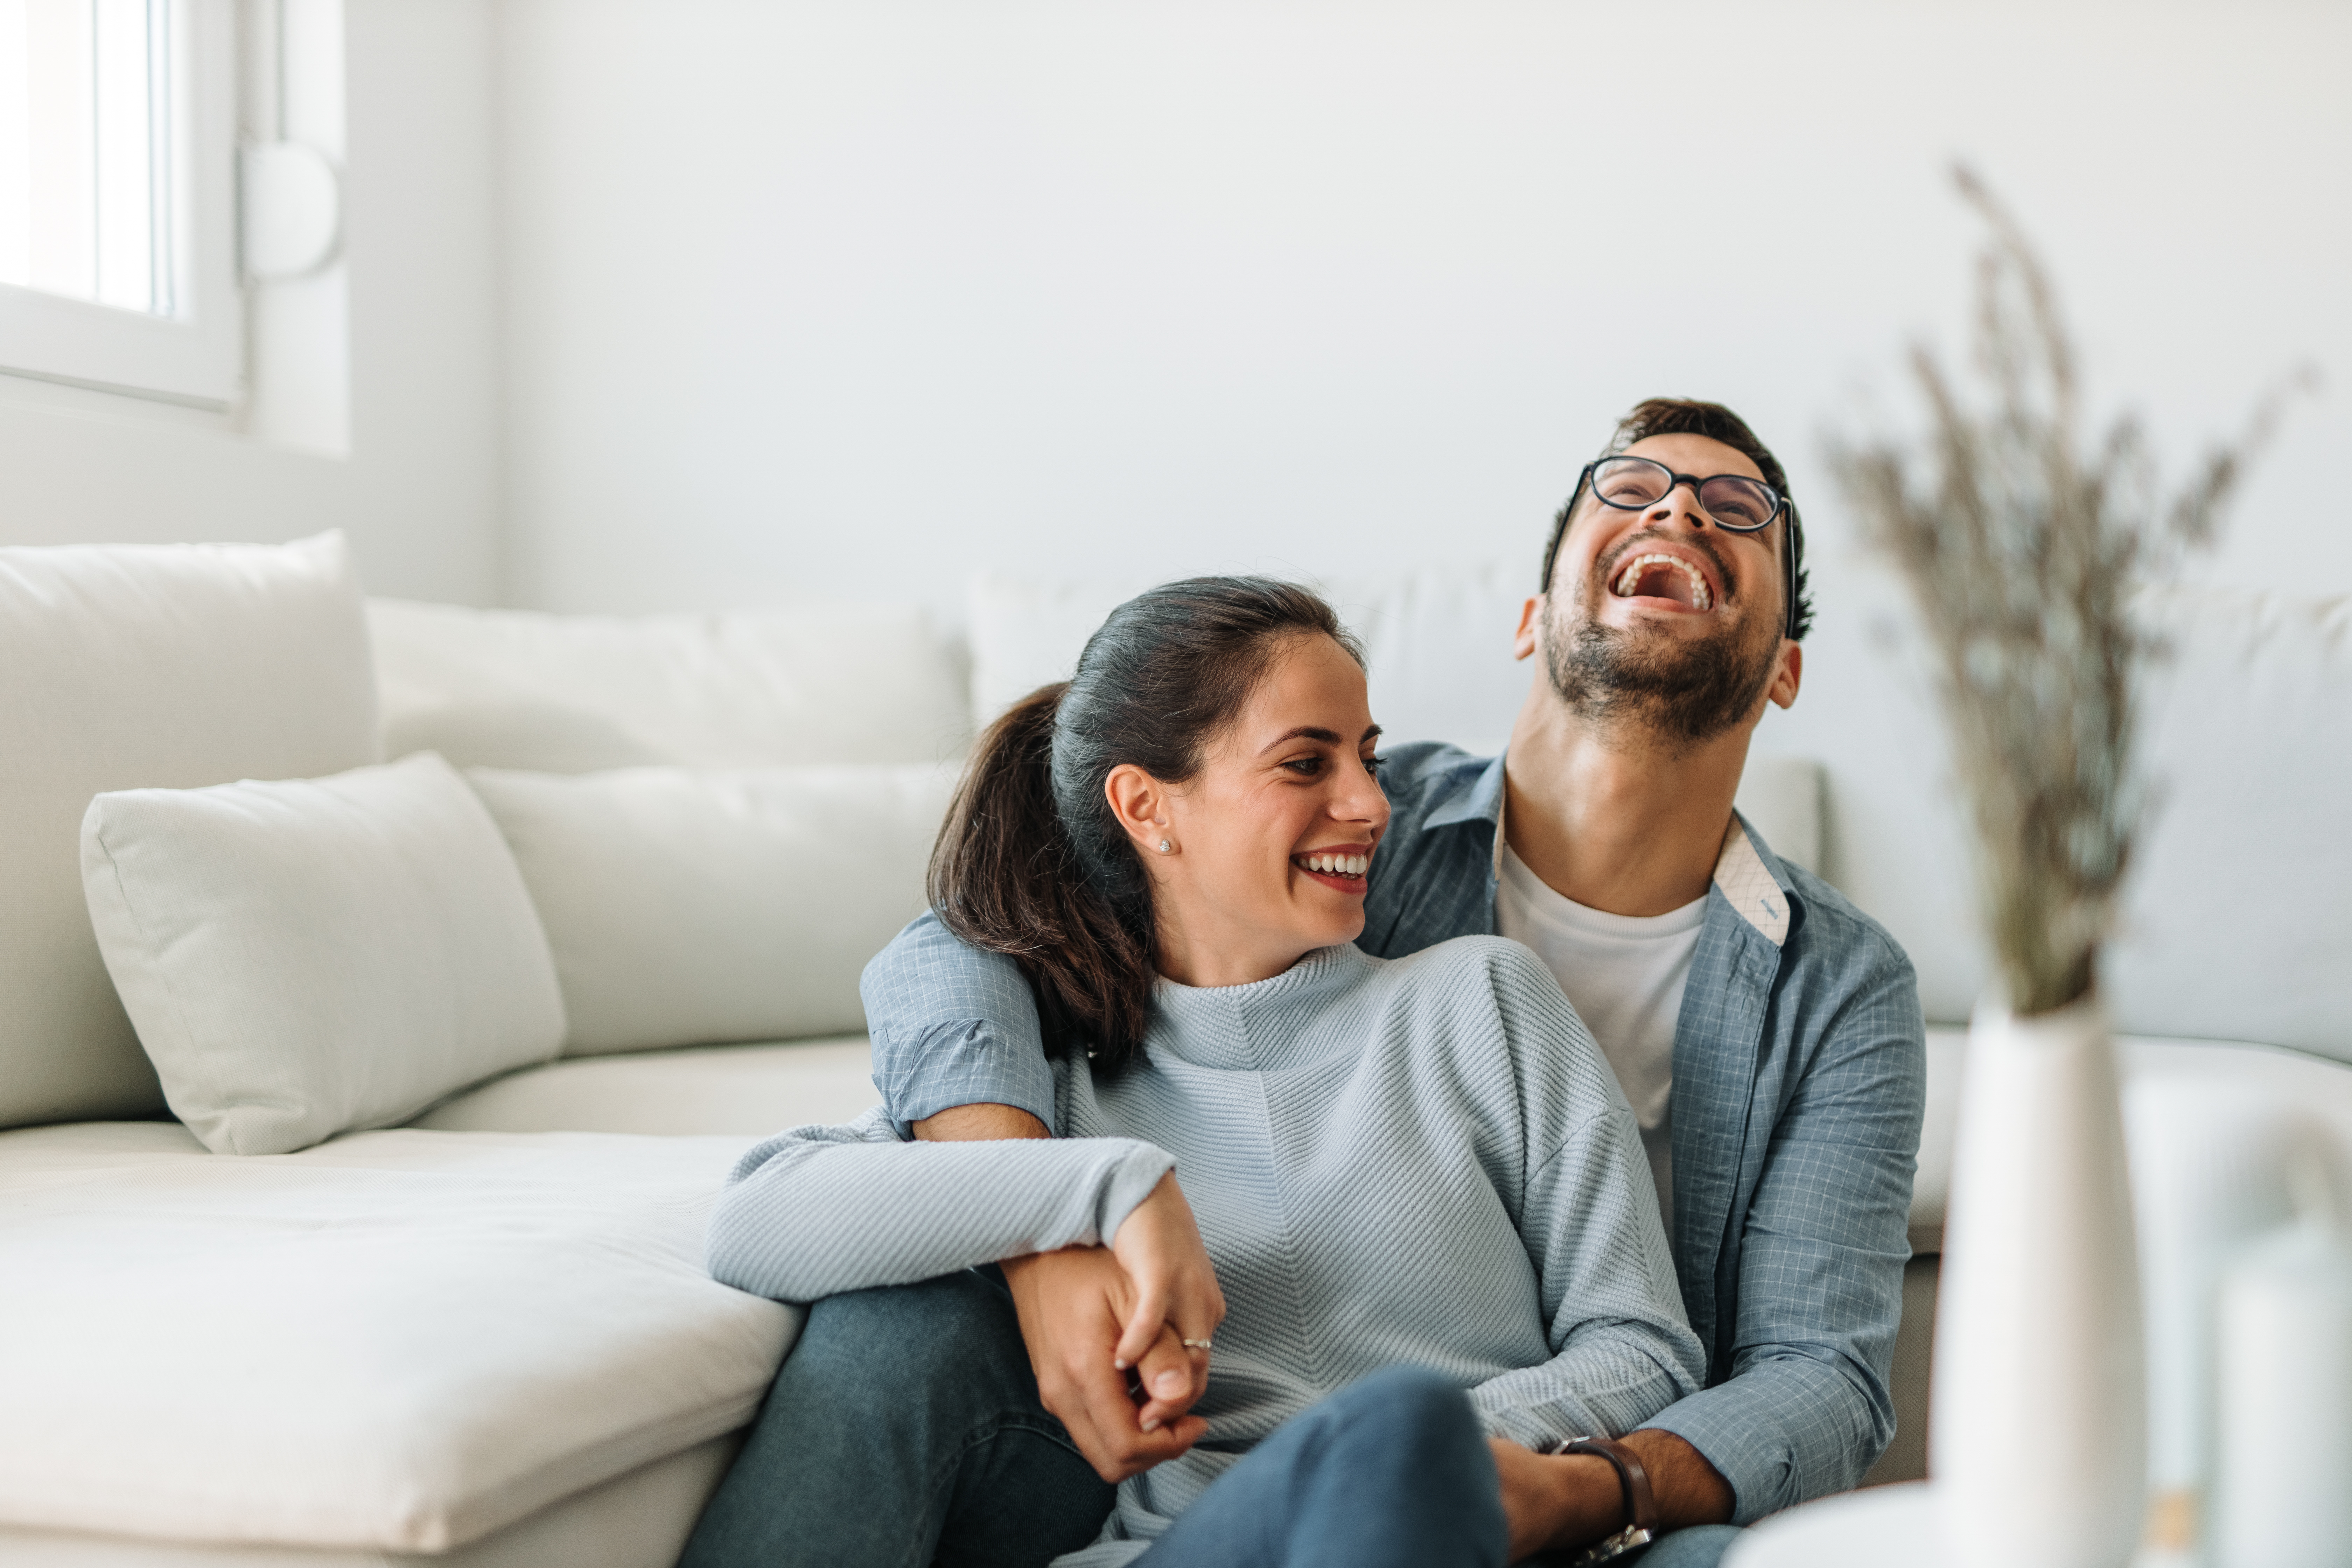 Building Stronger Bonds with Your Partner: An Overview of the Gottman Method